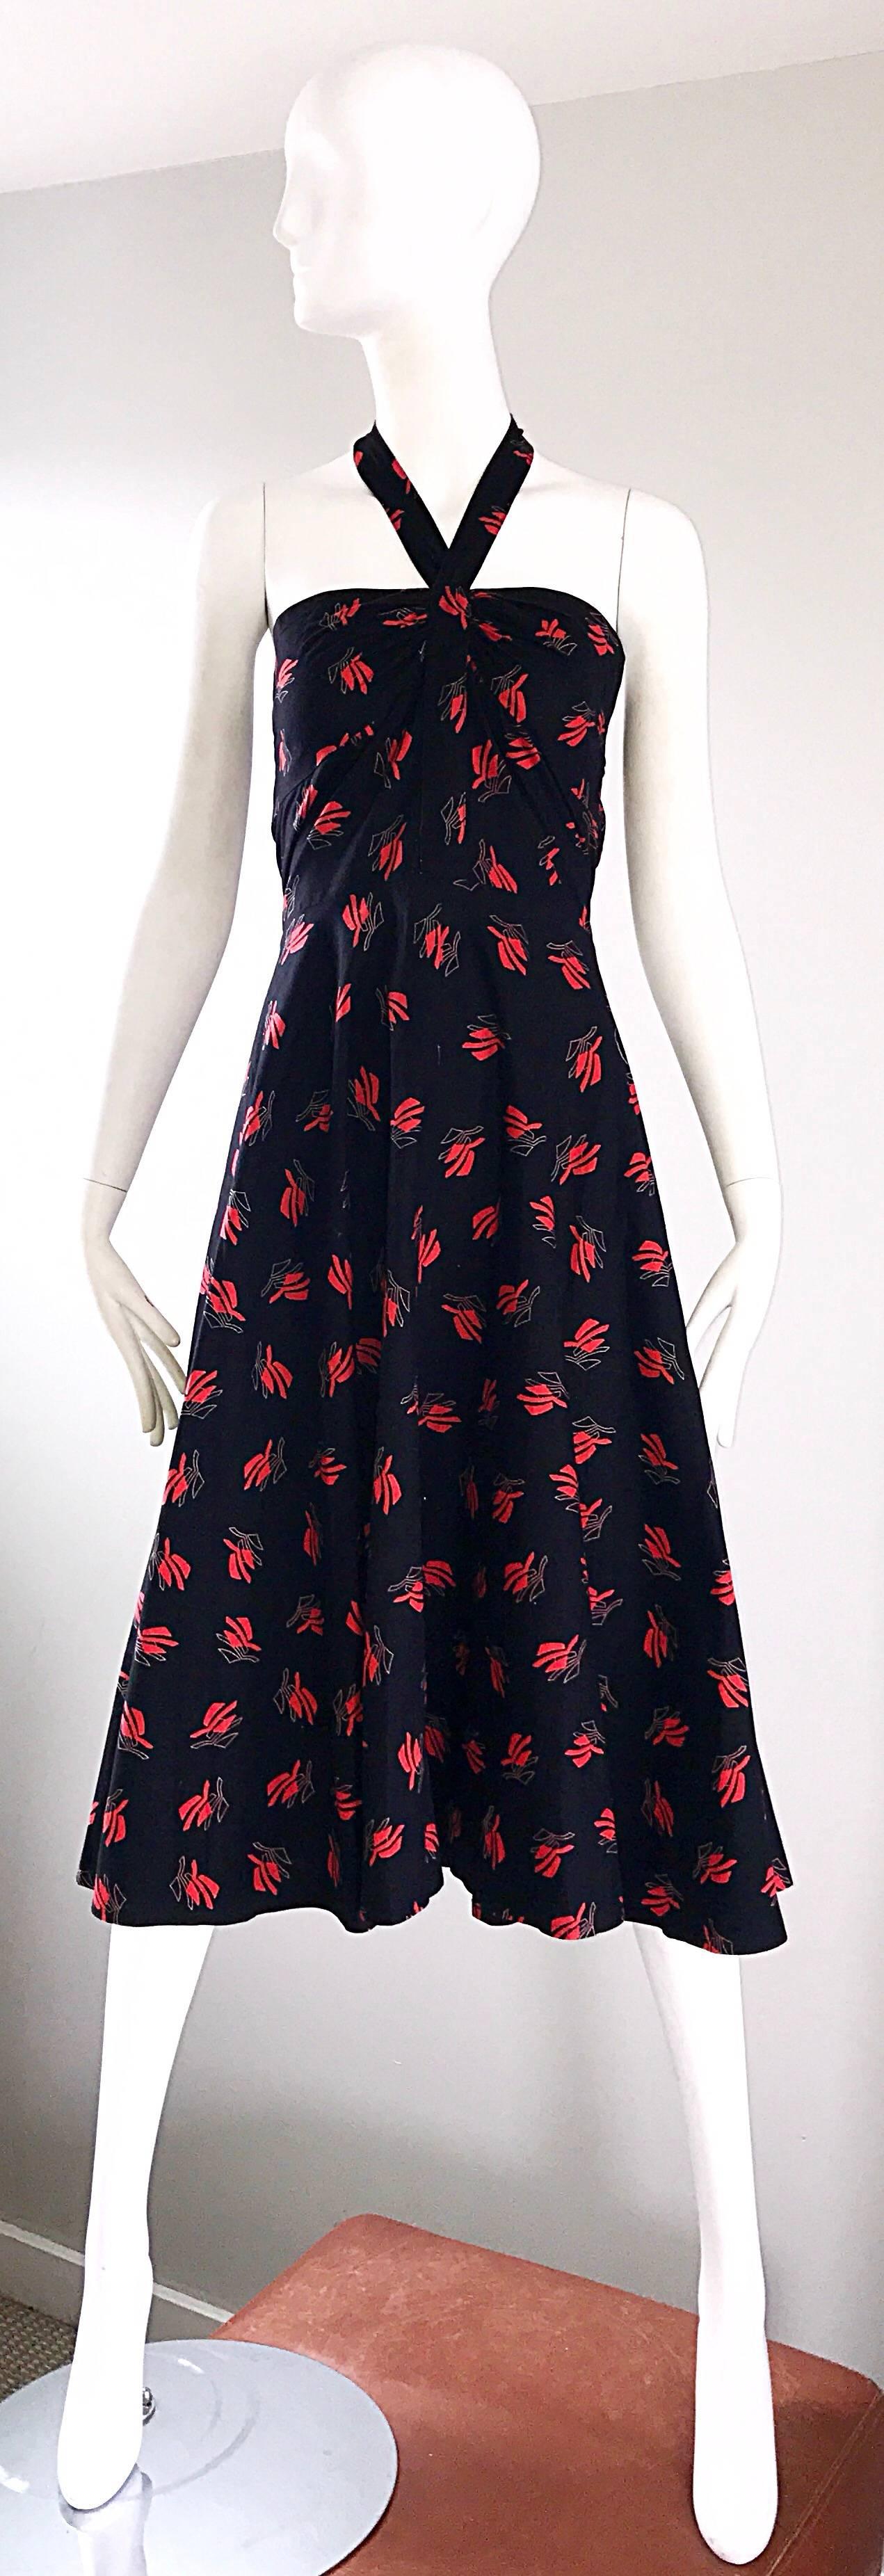 Smashing vintage GUY LAROCHE Oriental themed cotton halter sun dress! Features a black body, with an amazing red fan-like print throughout. Flattering fitted bodice, with a nice forgiving full skirt. Halter style ties at the back neck. Hidden zipper